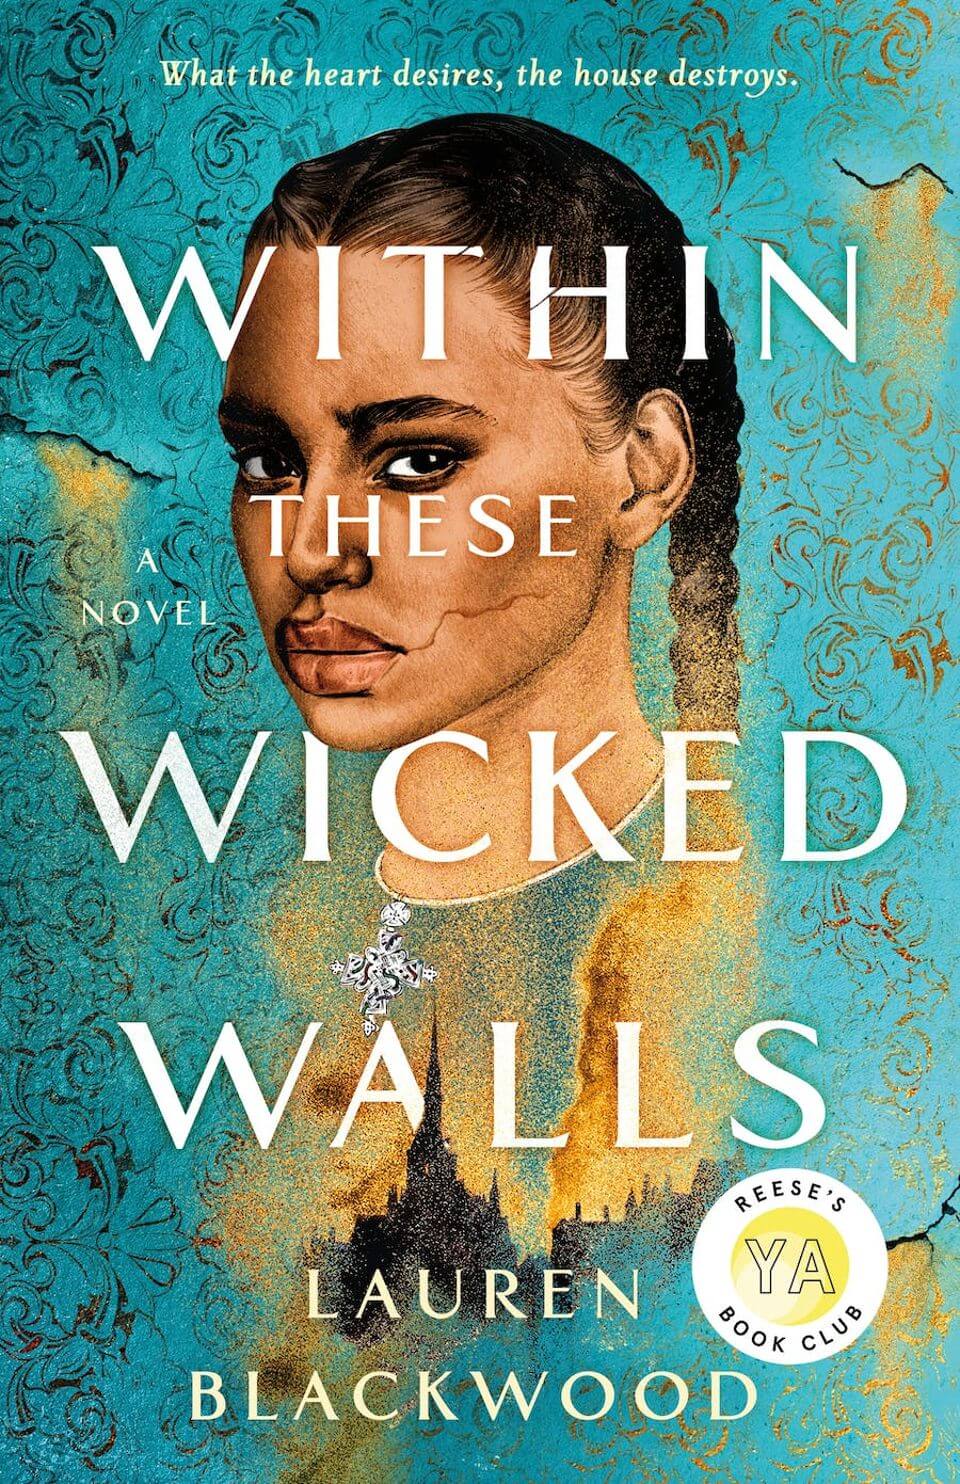 within these wicked walls book cover